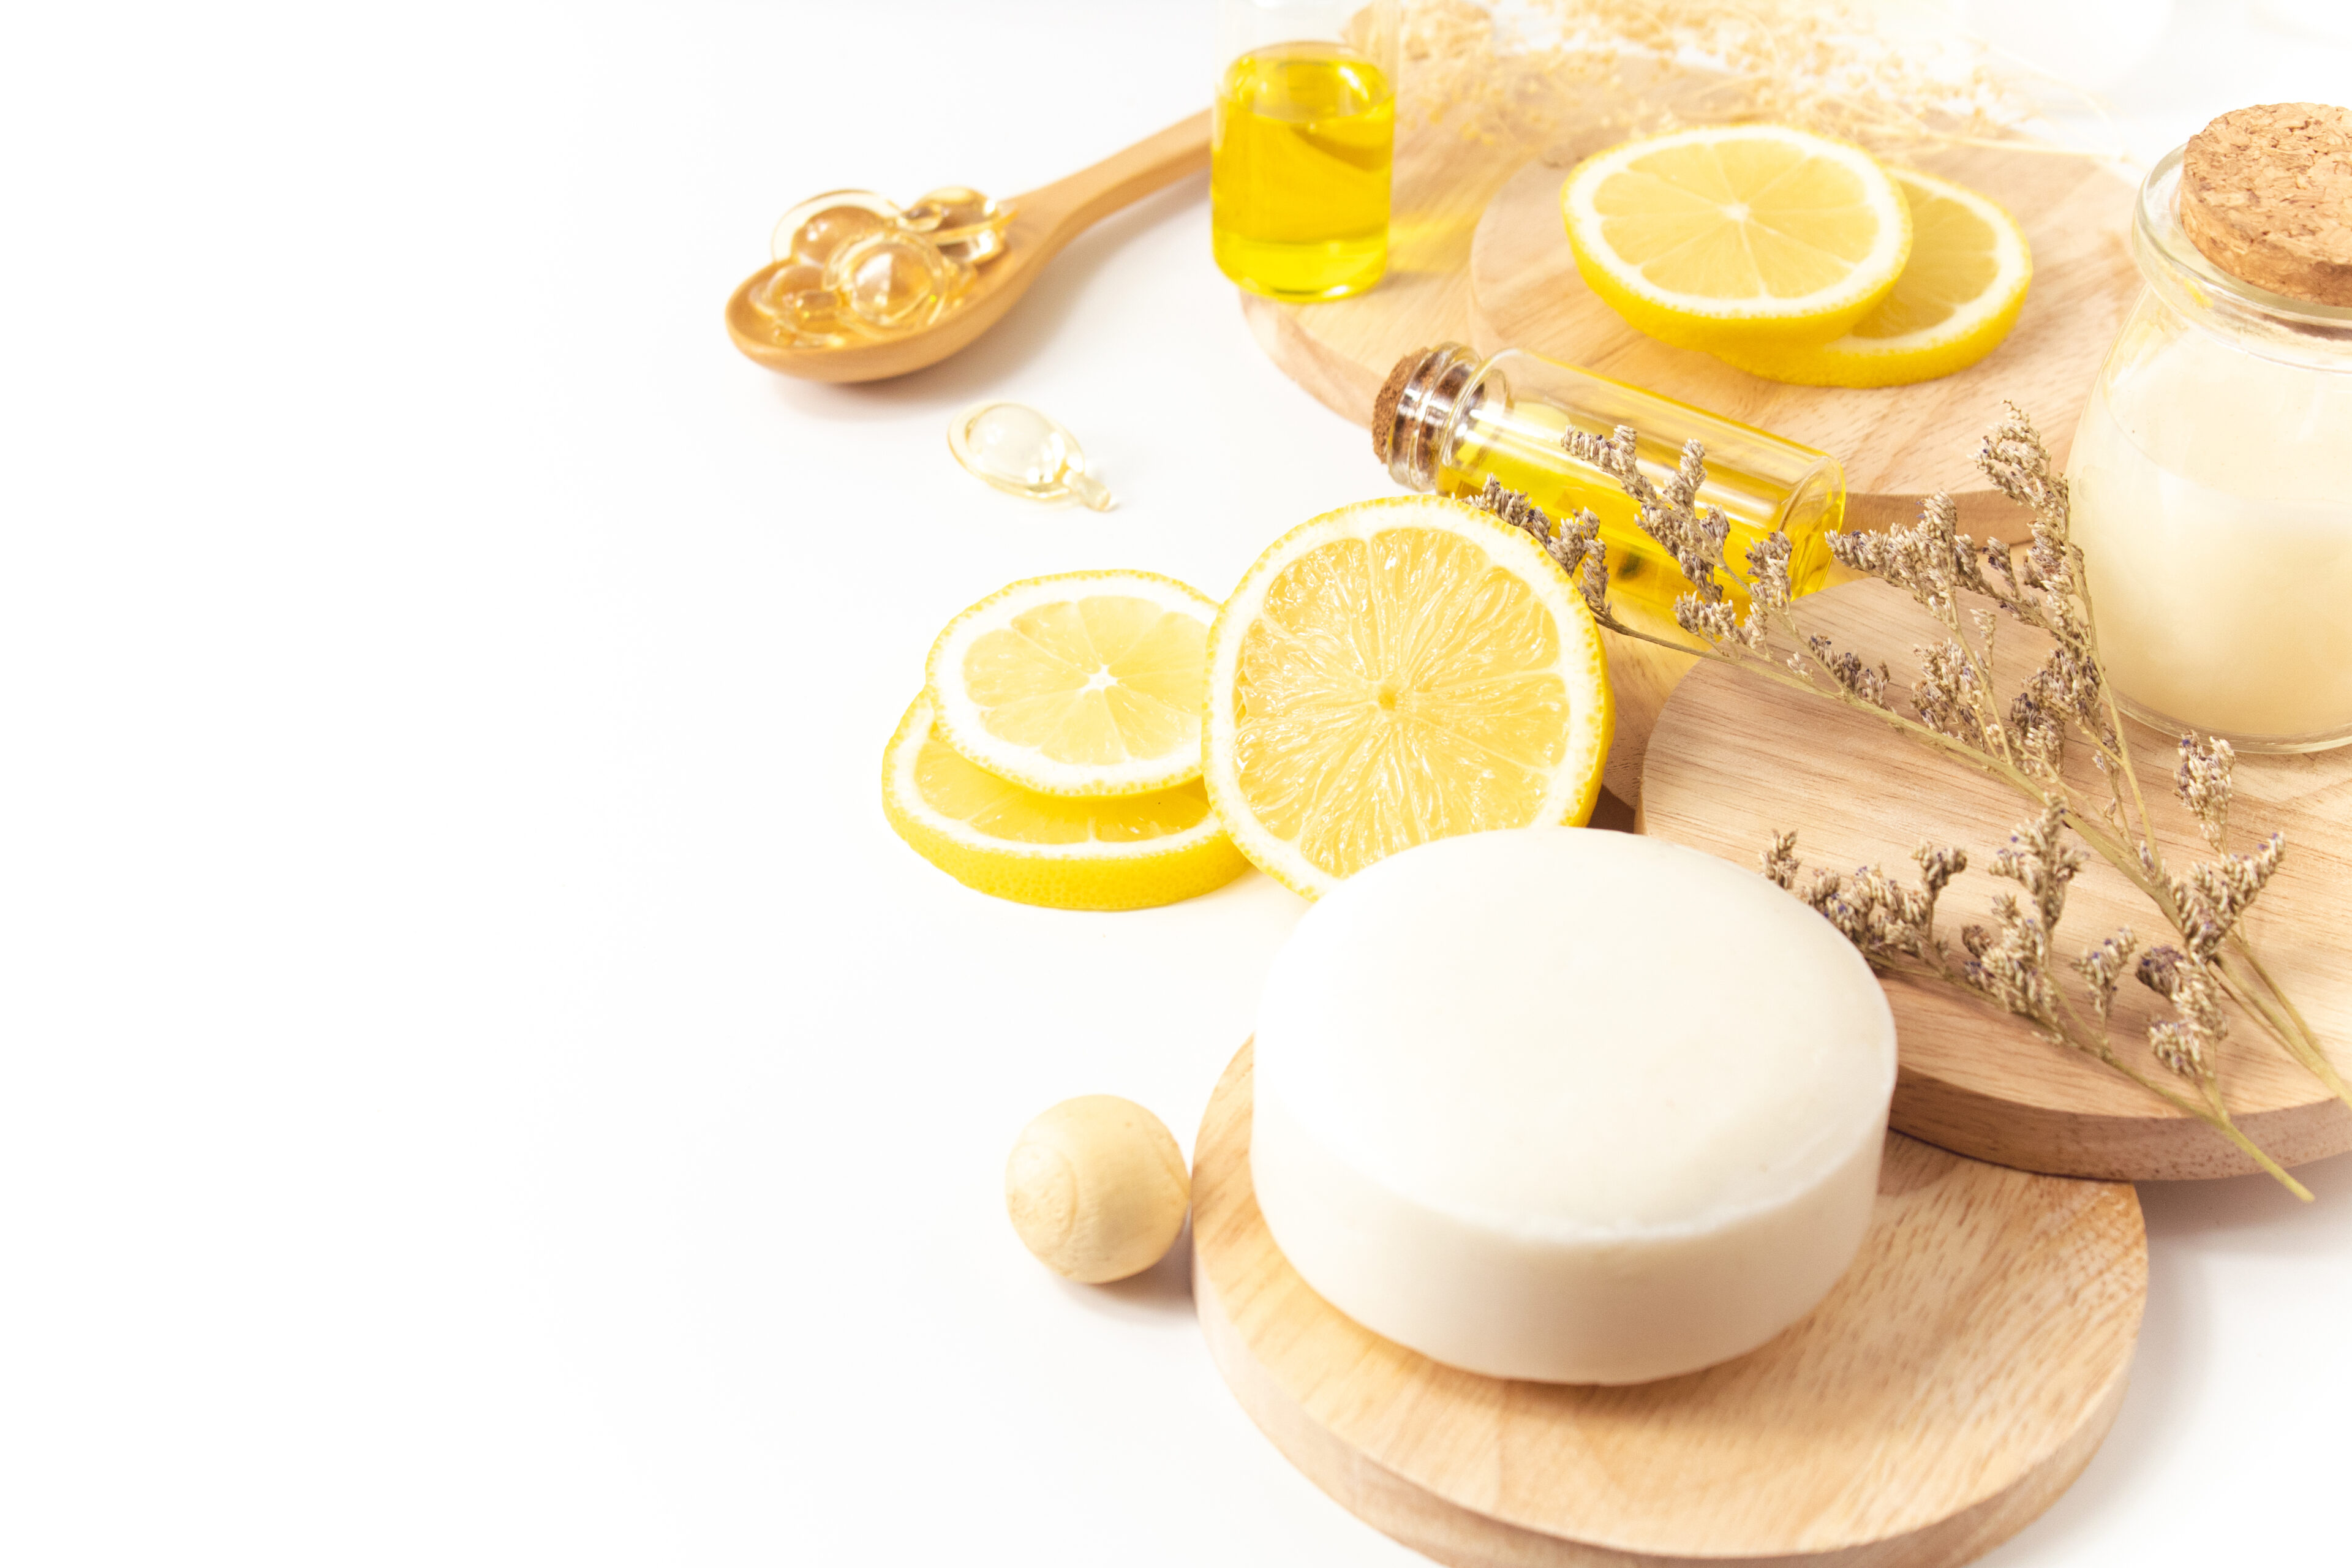 Lemon juice and dish soap: The perfect pair for removing toner